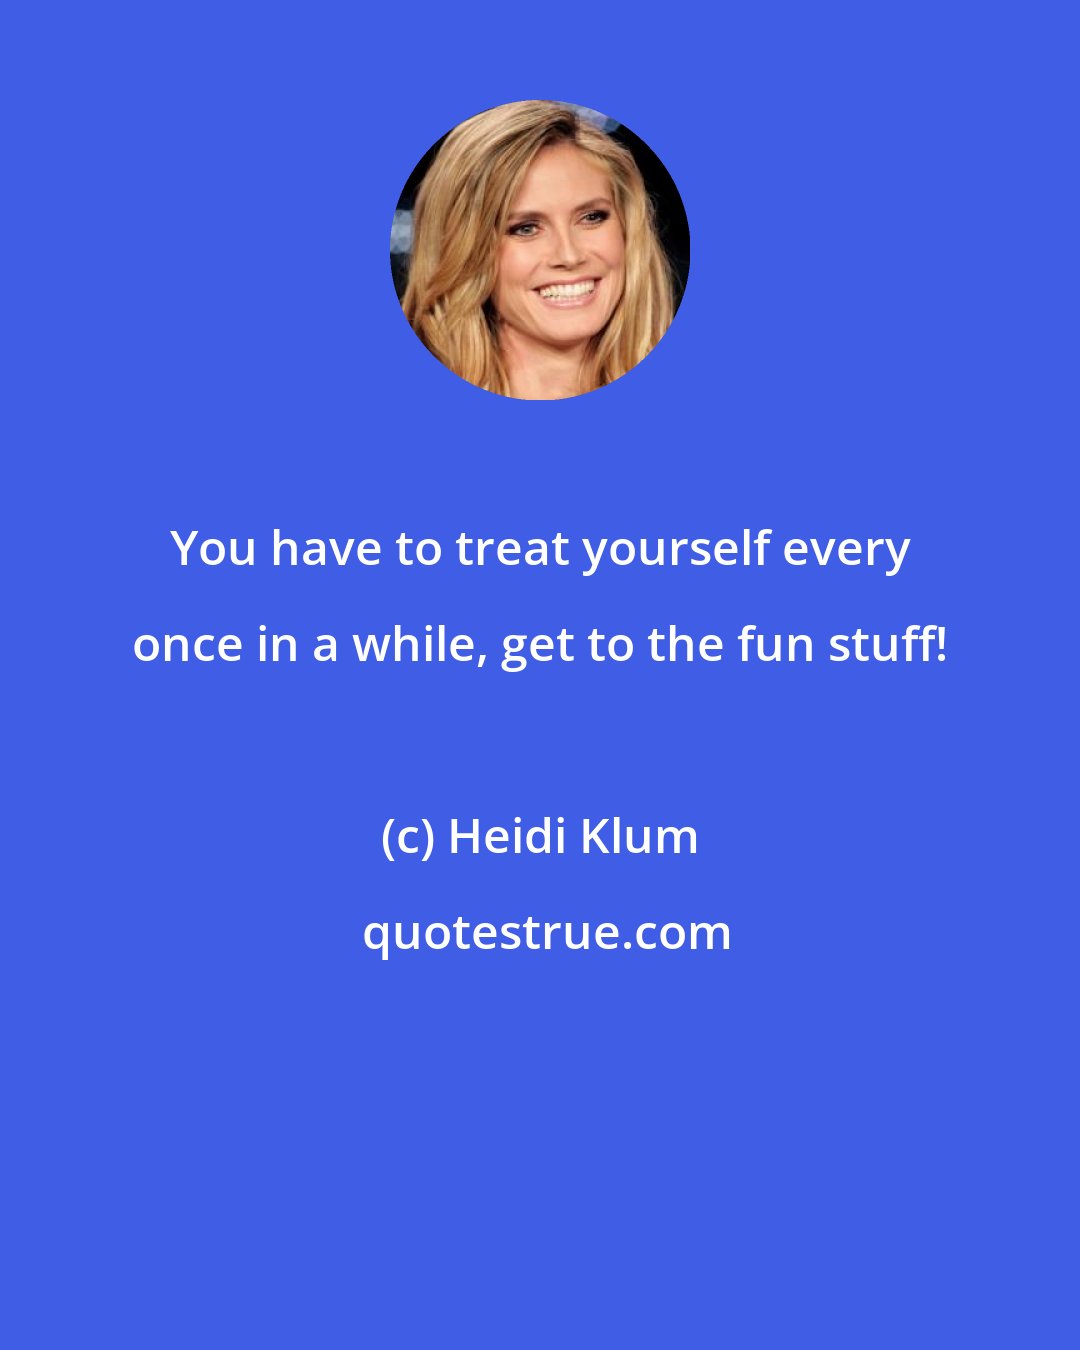 Heidi Klum: You have to treat yourself every once in a while, get to the fun stuff!